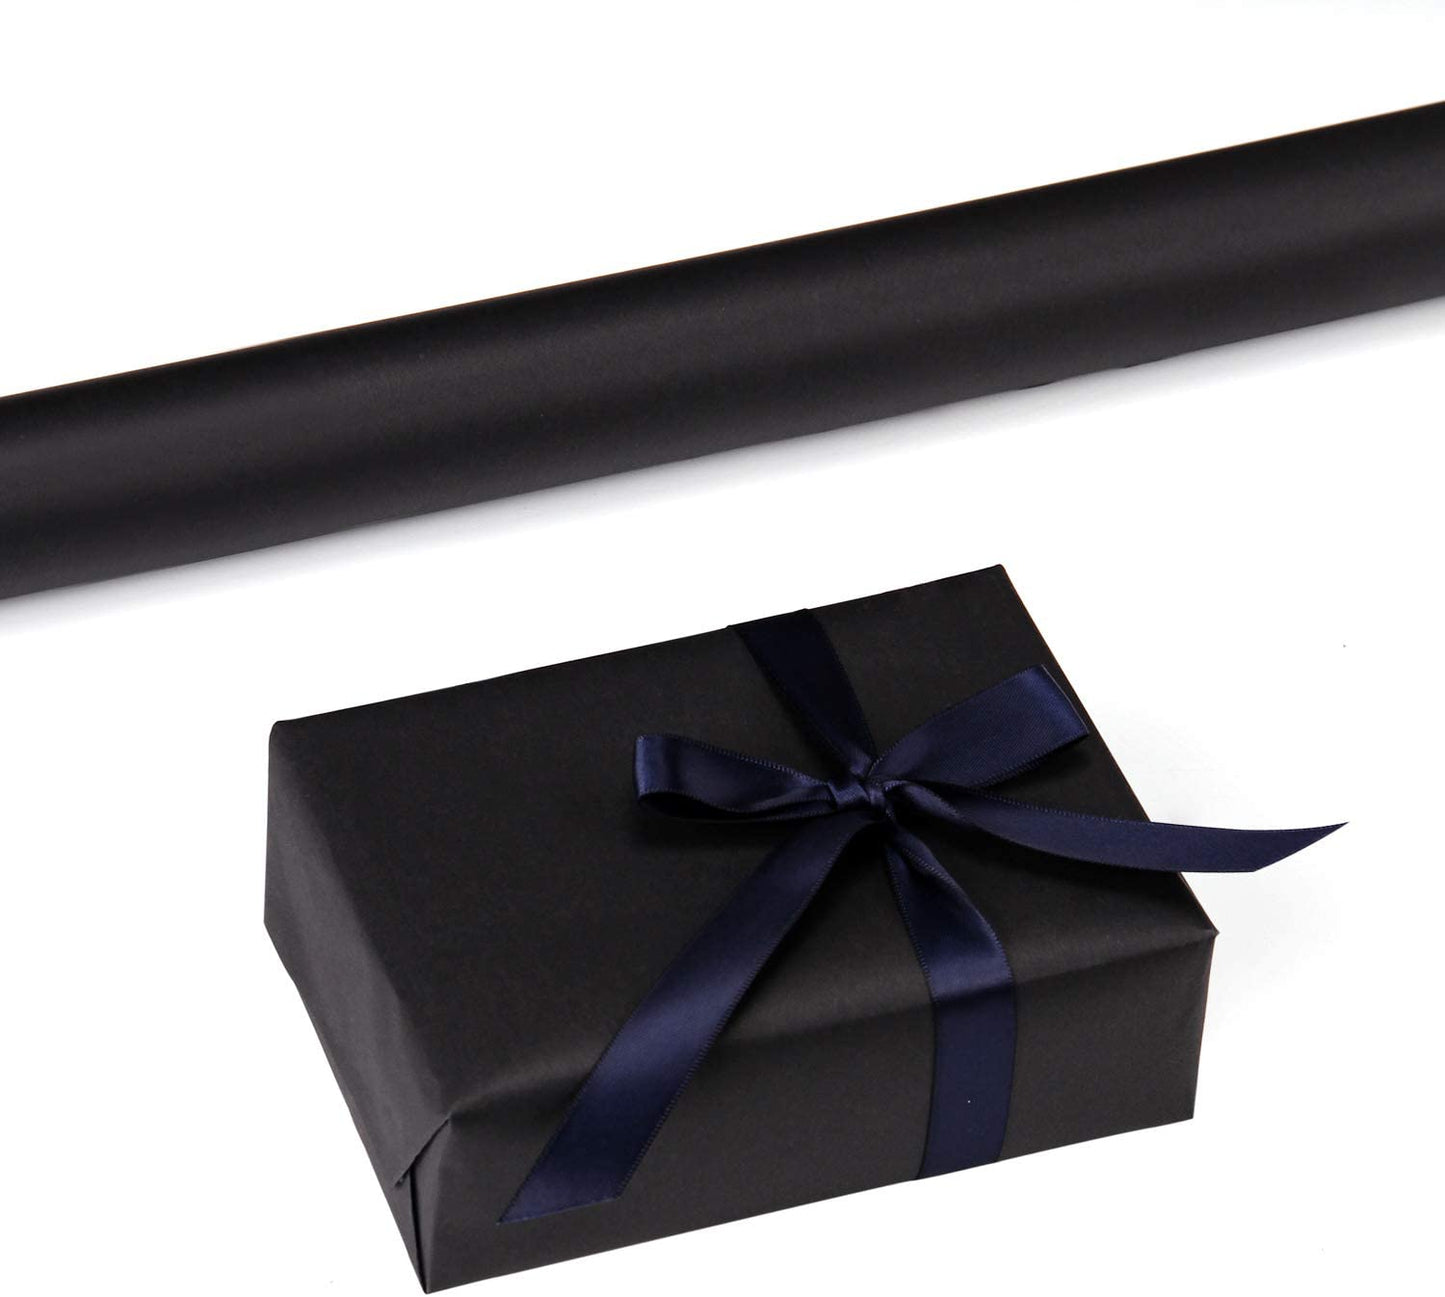 WRAPLA Black Kraft Paper Roll - 45CM x 30M - Natural Recyclable Paper Crafts, Art, Small Wrapping, Packing, Postal, Shipping, Dunnage & Parcel